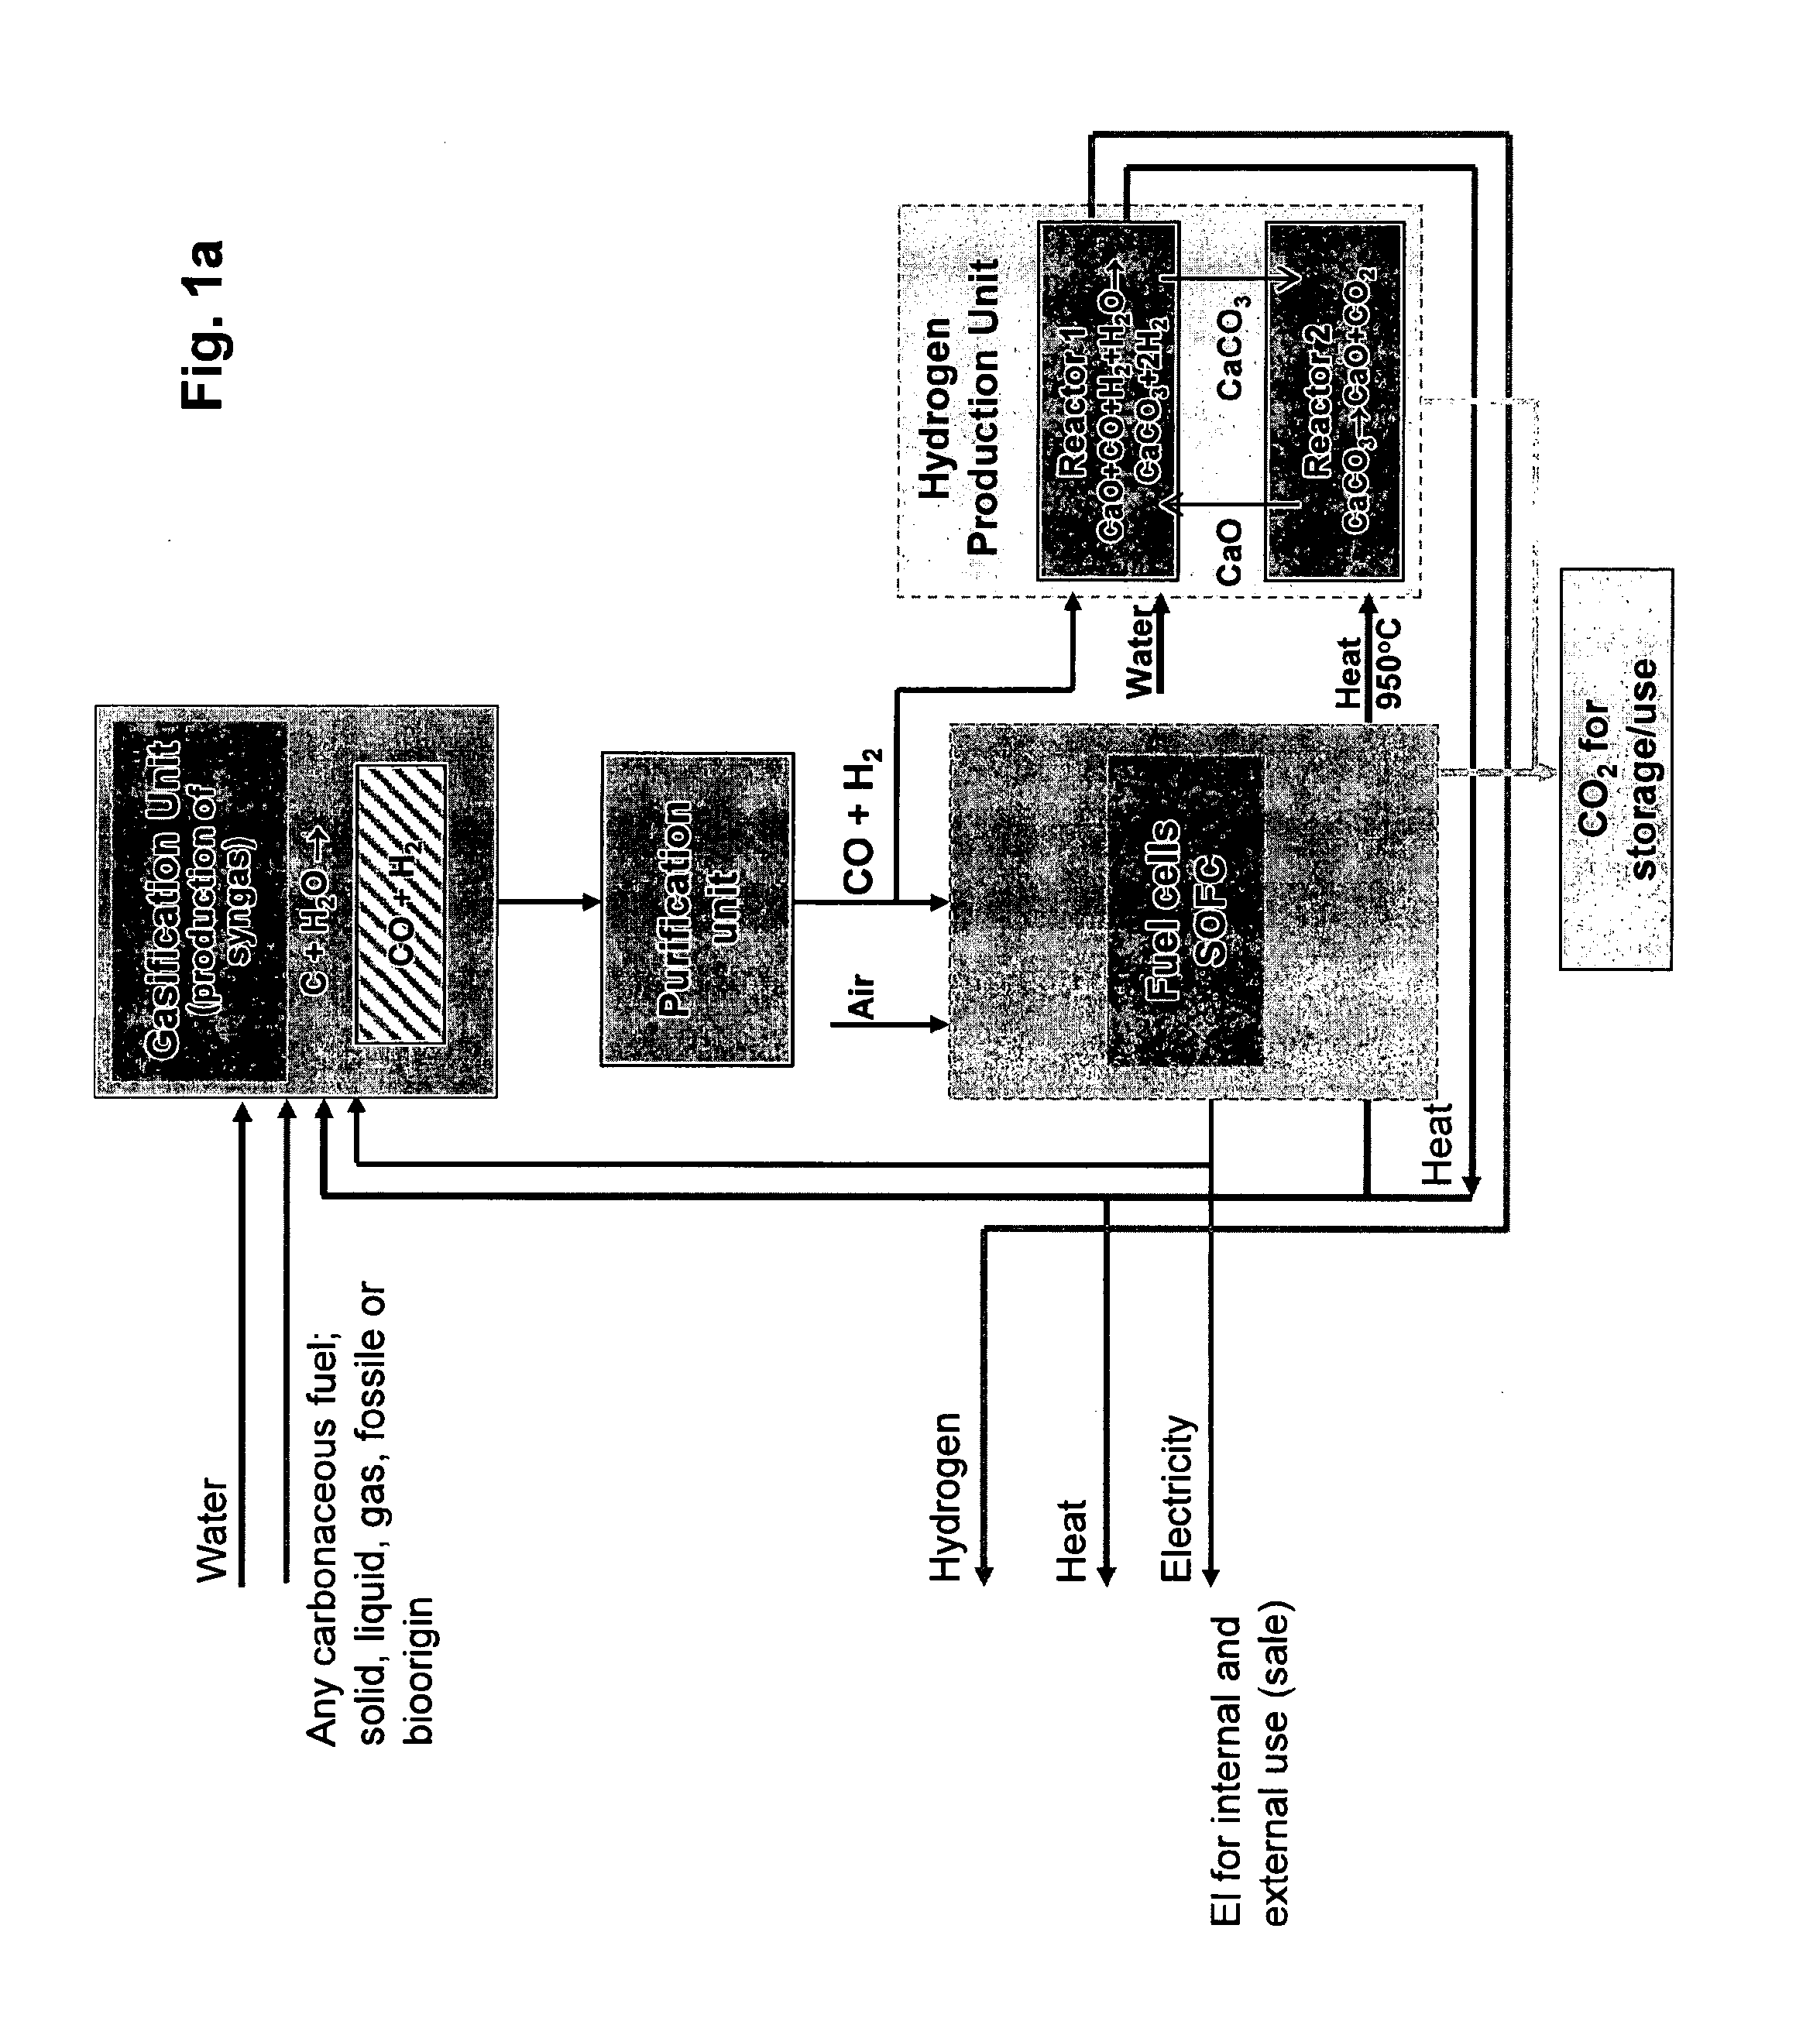 Method and device for simultaneous production of energy in the forms electricity, heat and hydrogen gas